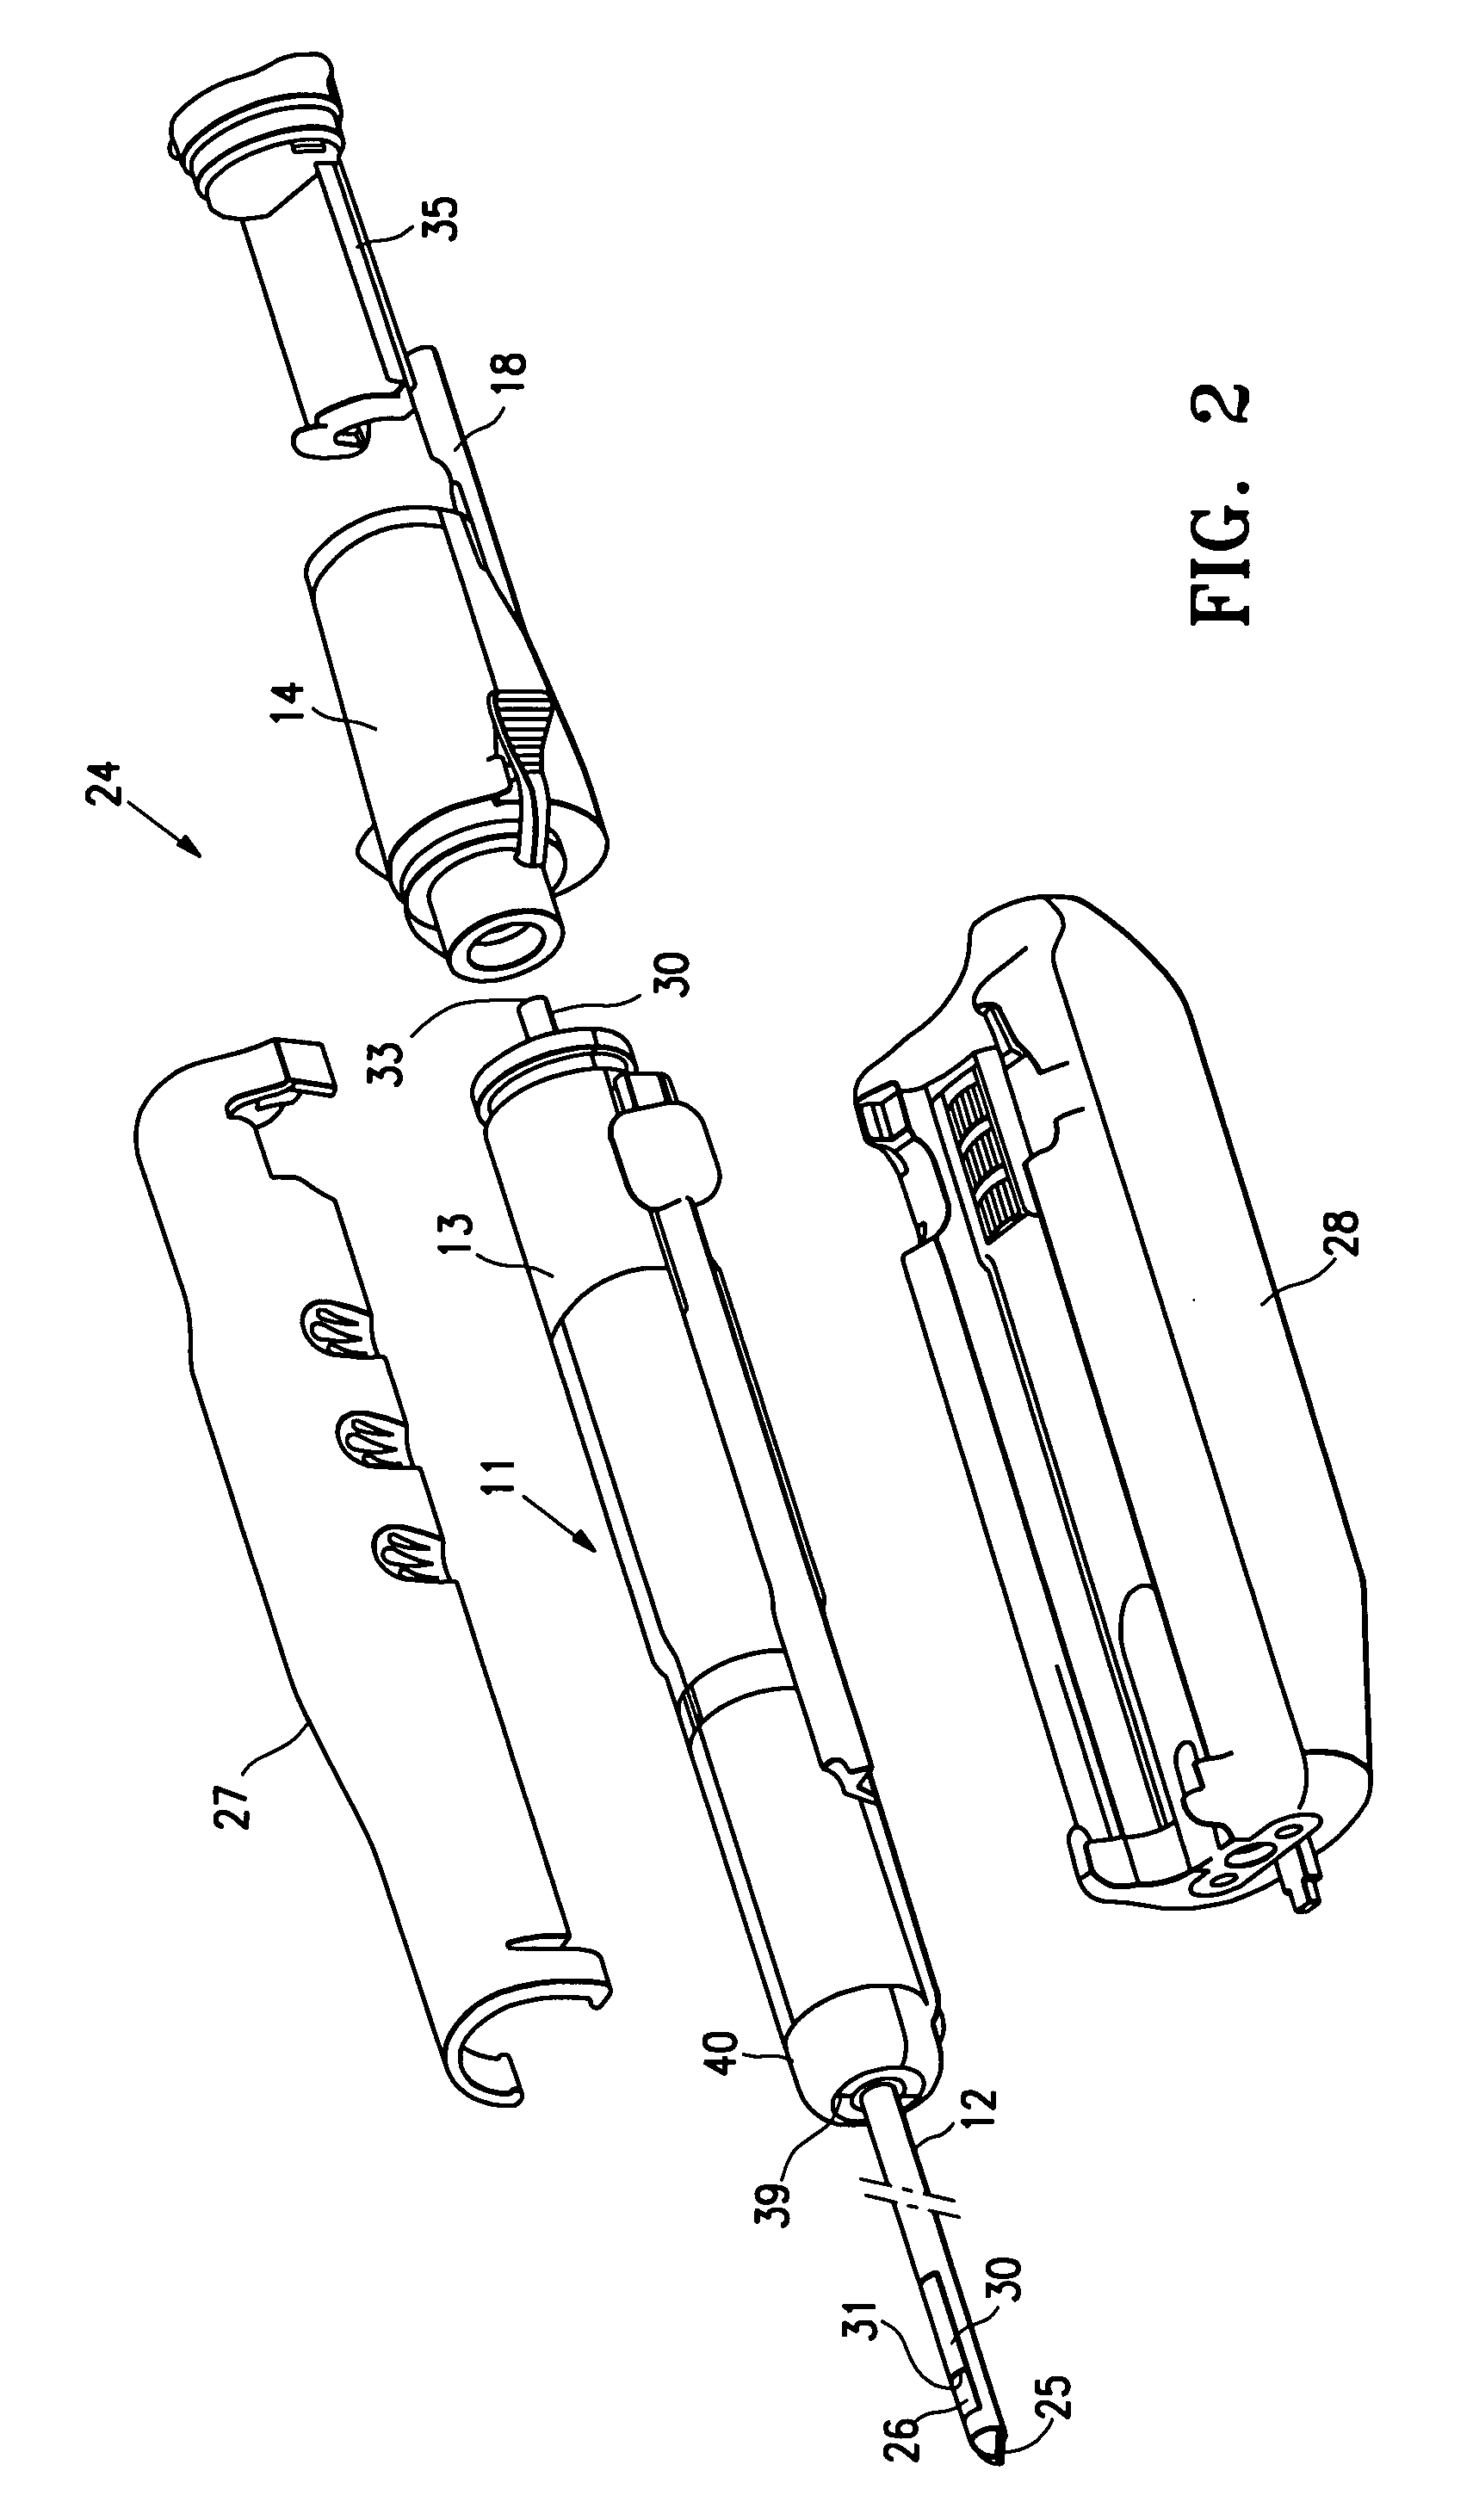 Biopsy device with fluid delivery to tissue specimens